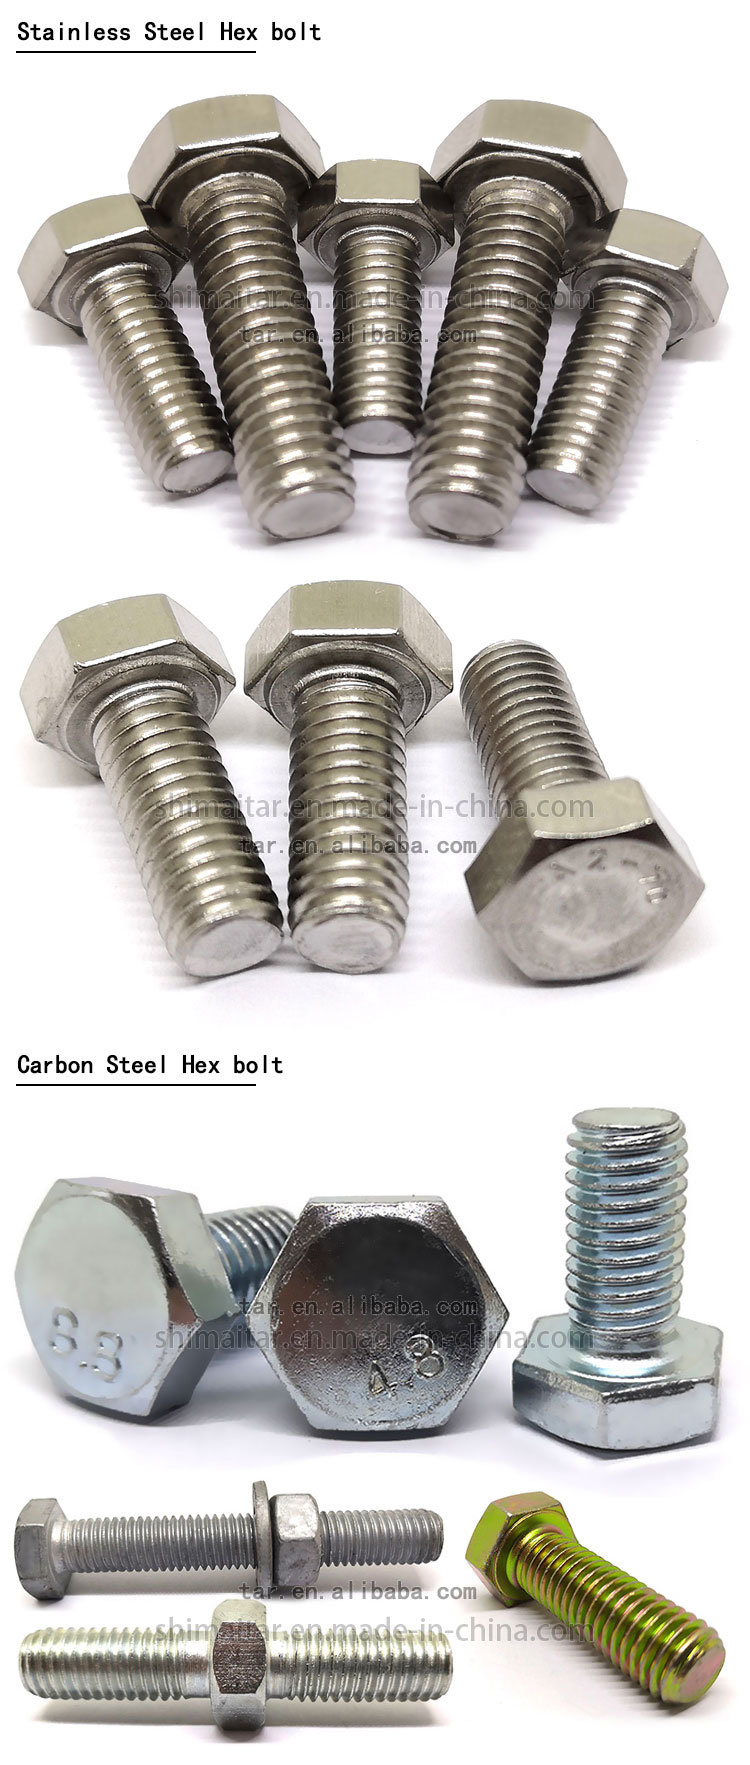 Wholesale Factory Galvanized Stainless Steel Hex Head Bolts and Nut